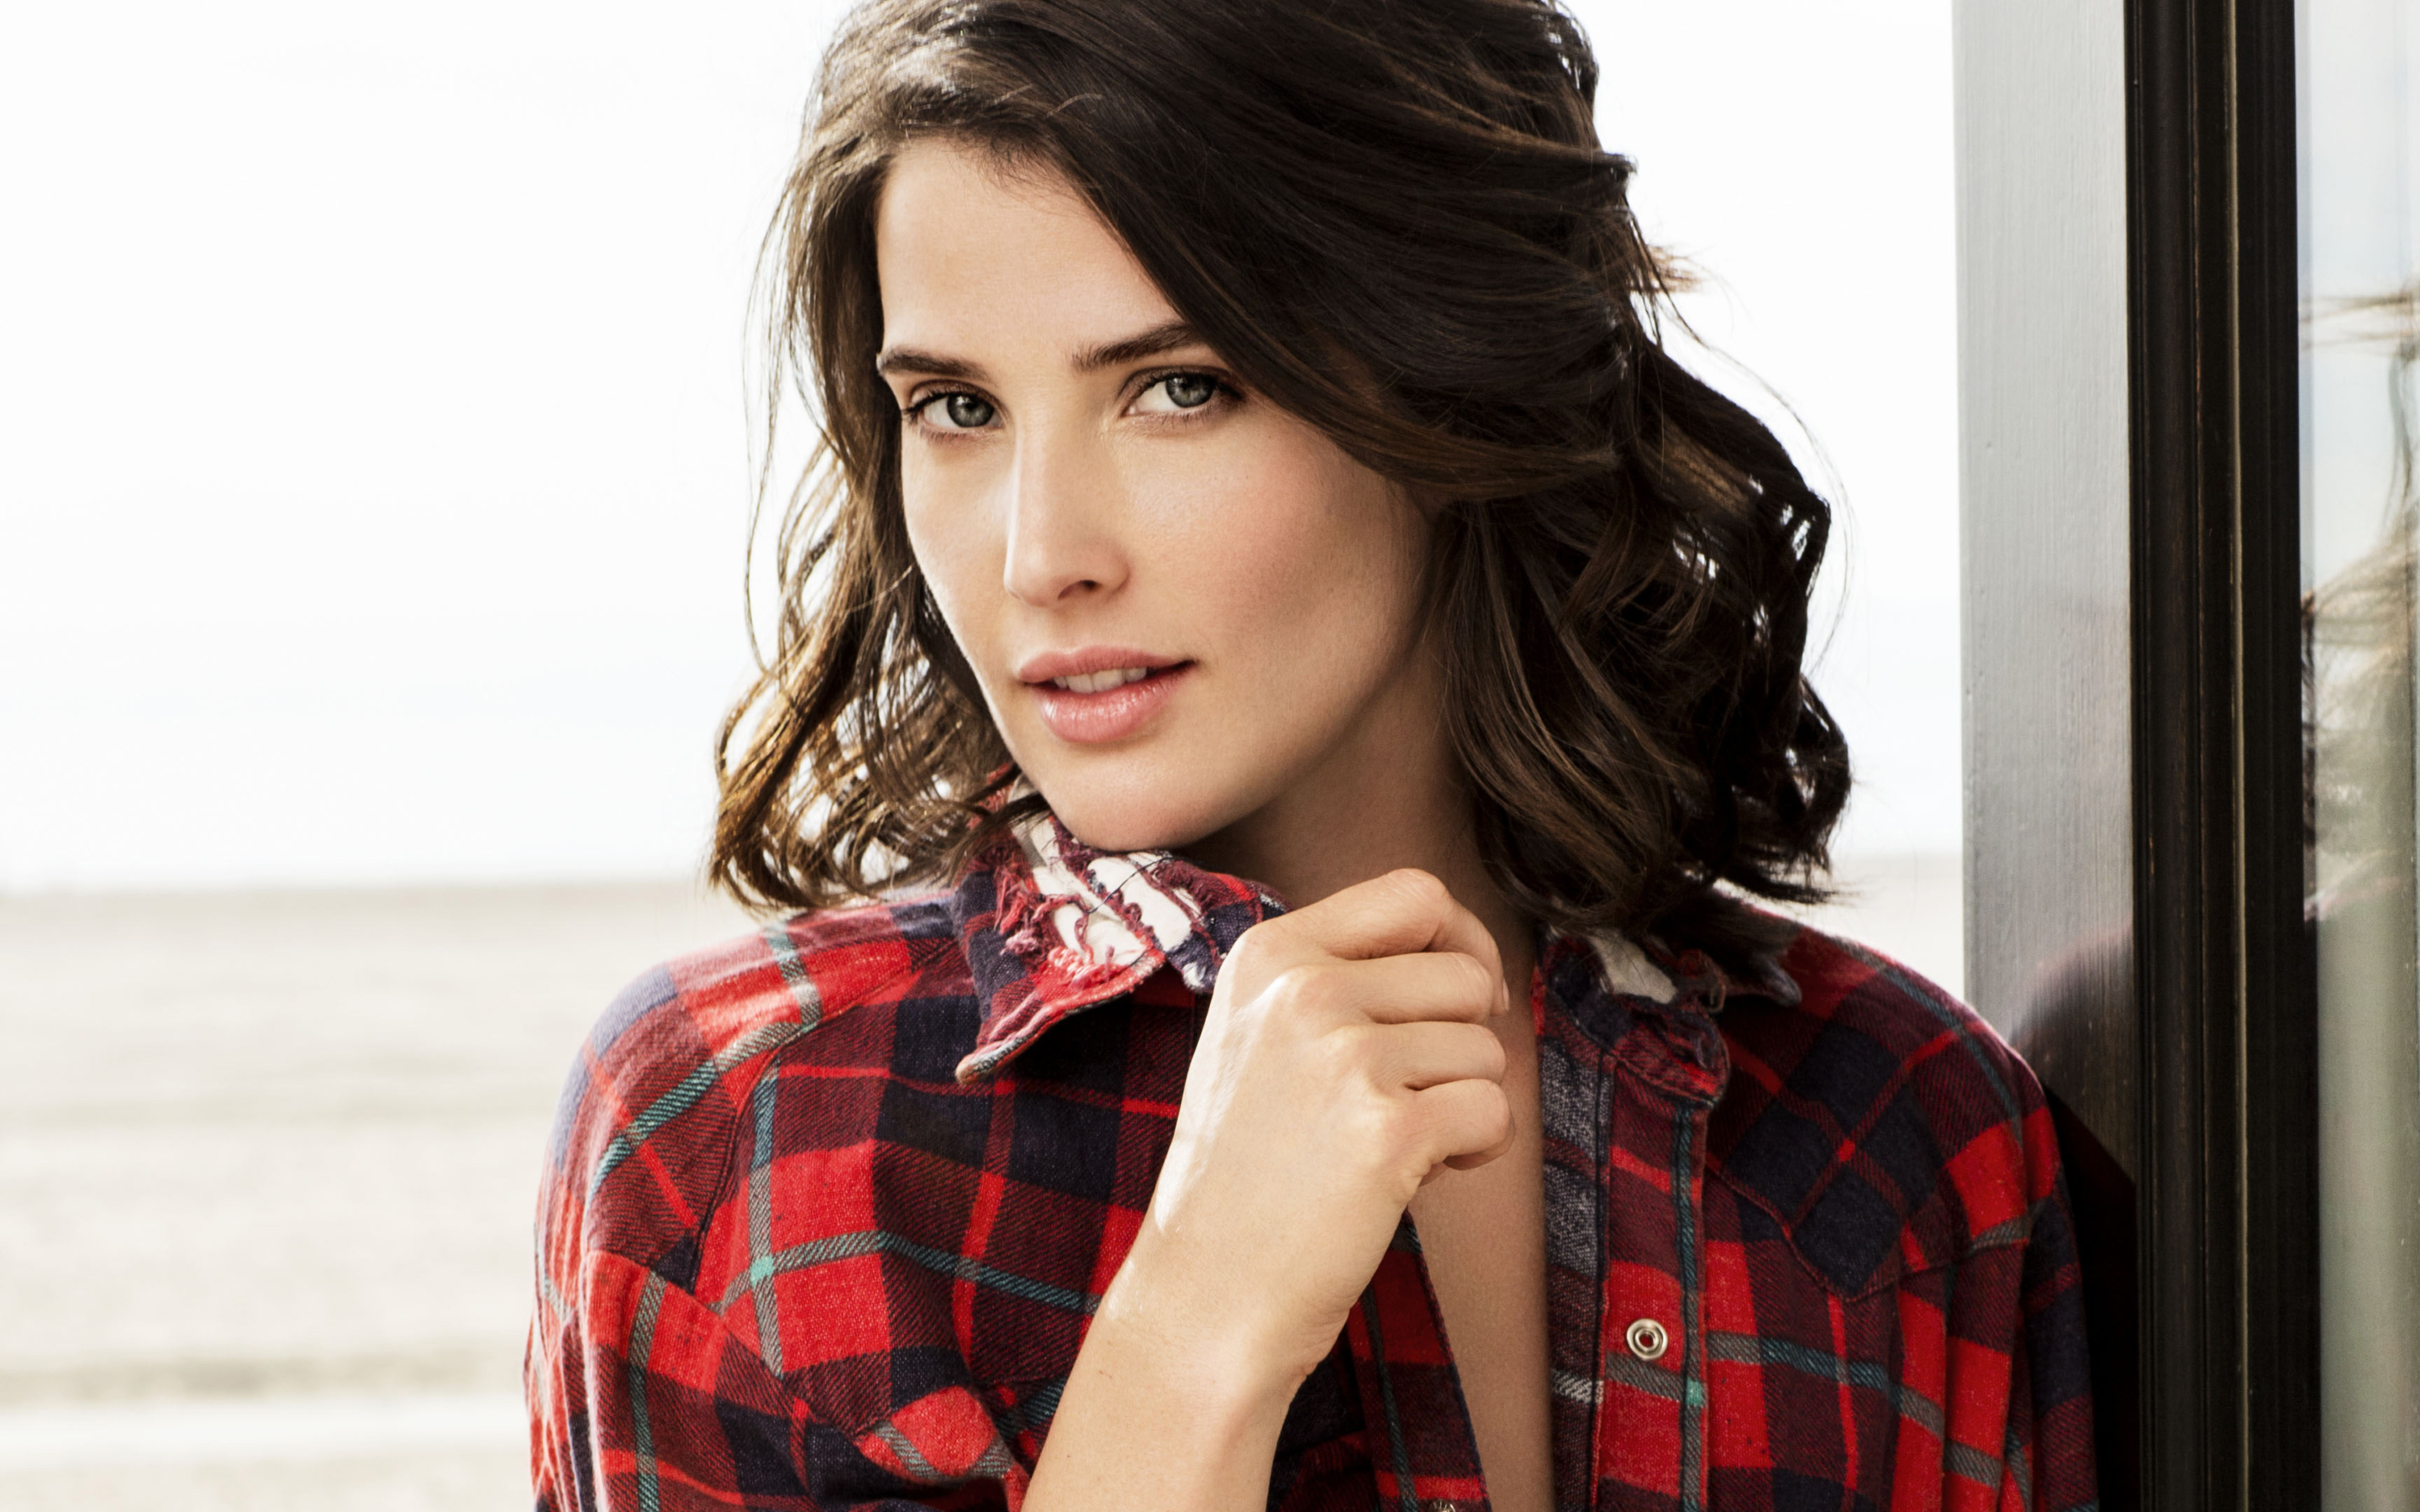 Cobie smulders hot pictures